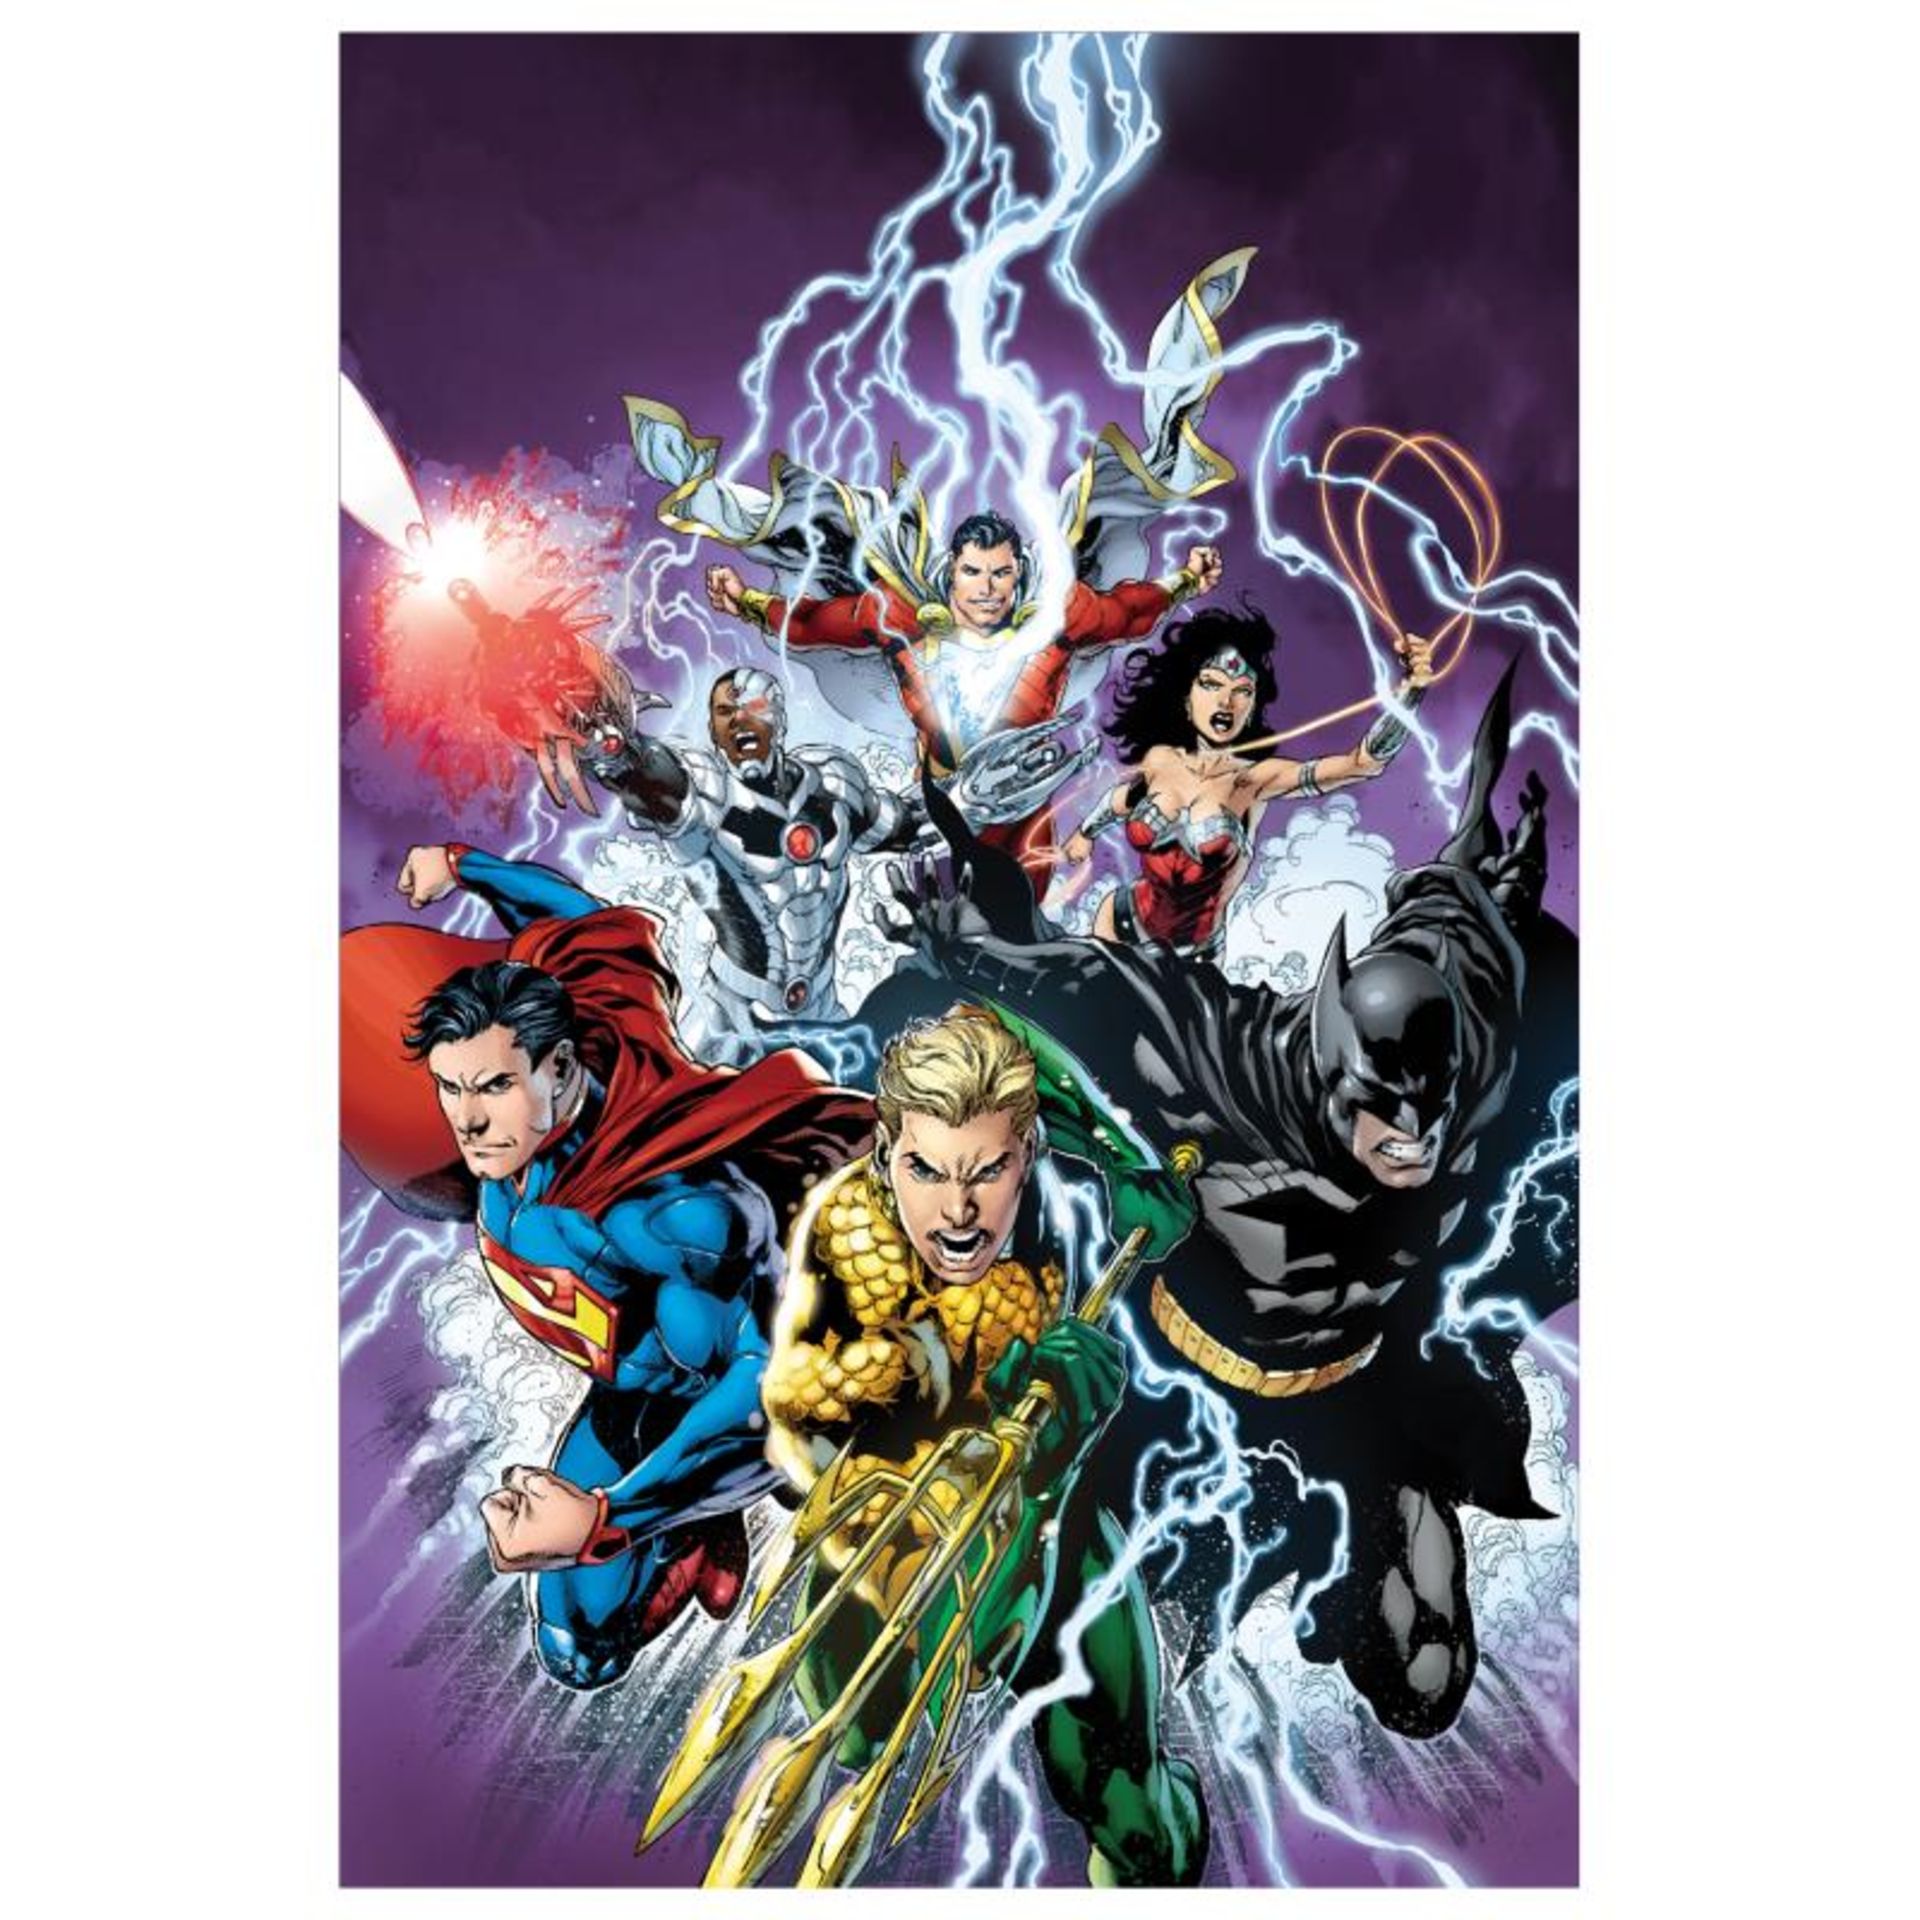 DC Comics, "Justice League #15" Numbered Limited Edition Giclee on Canvas by Iva